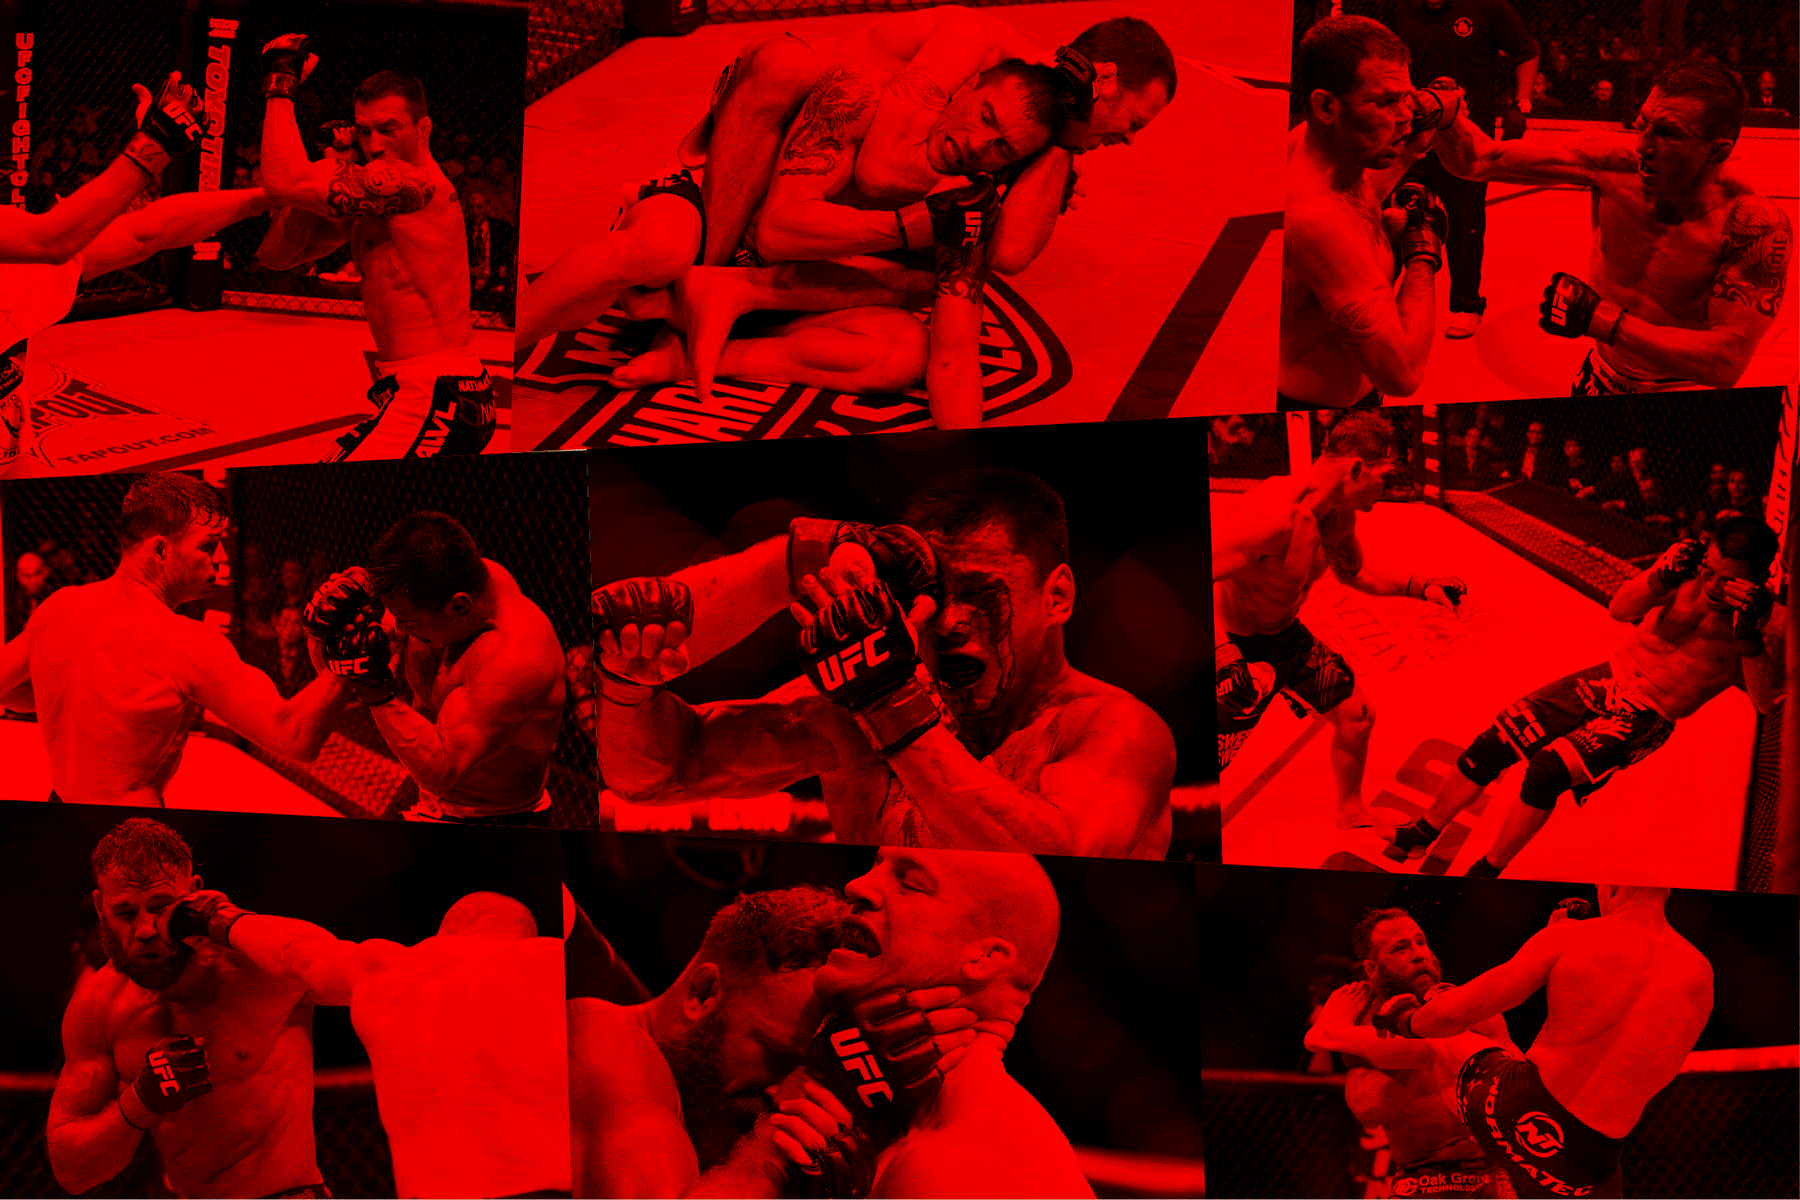 UFC bouts featuring (from top) Nate Quarry, Cung Le, and Kyle Kingsbury.